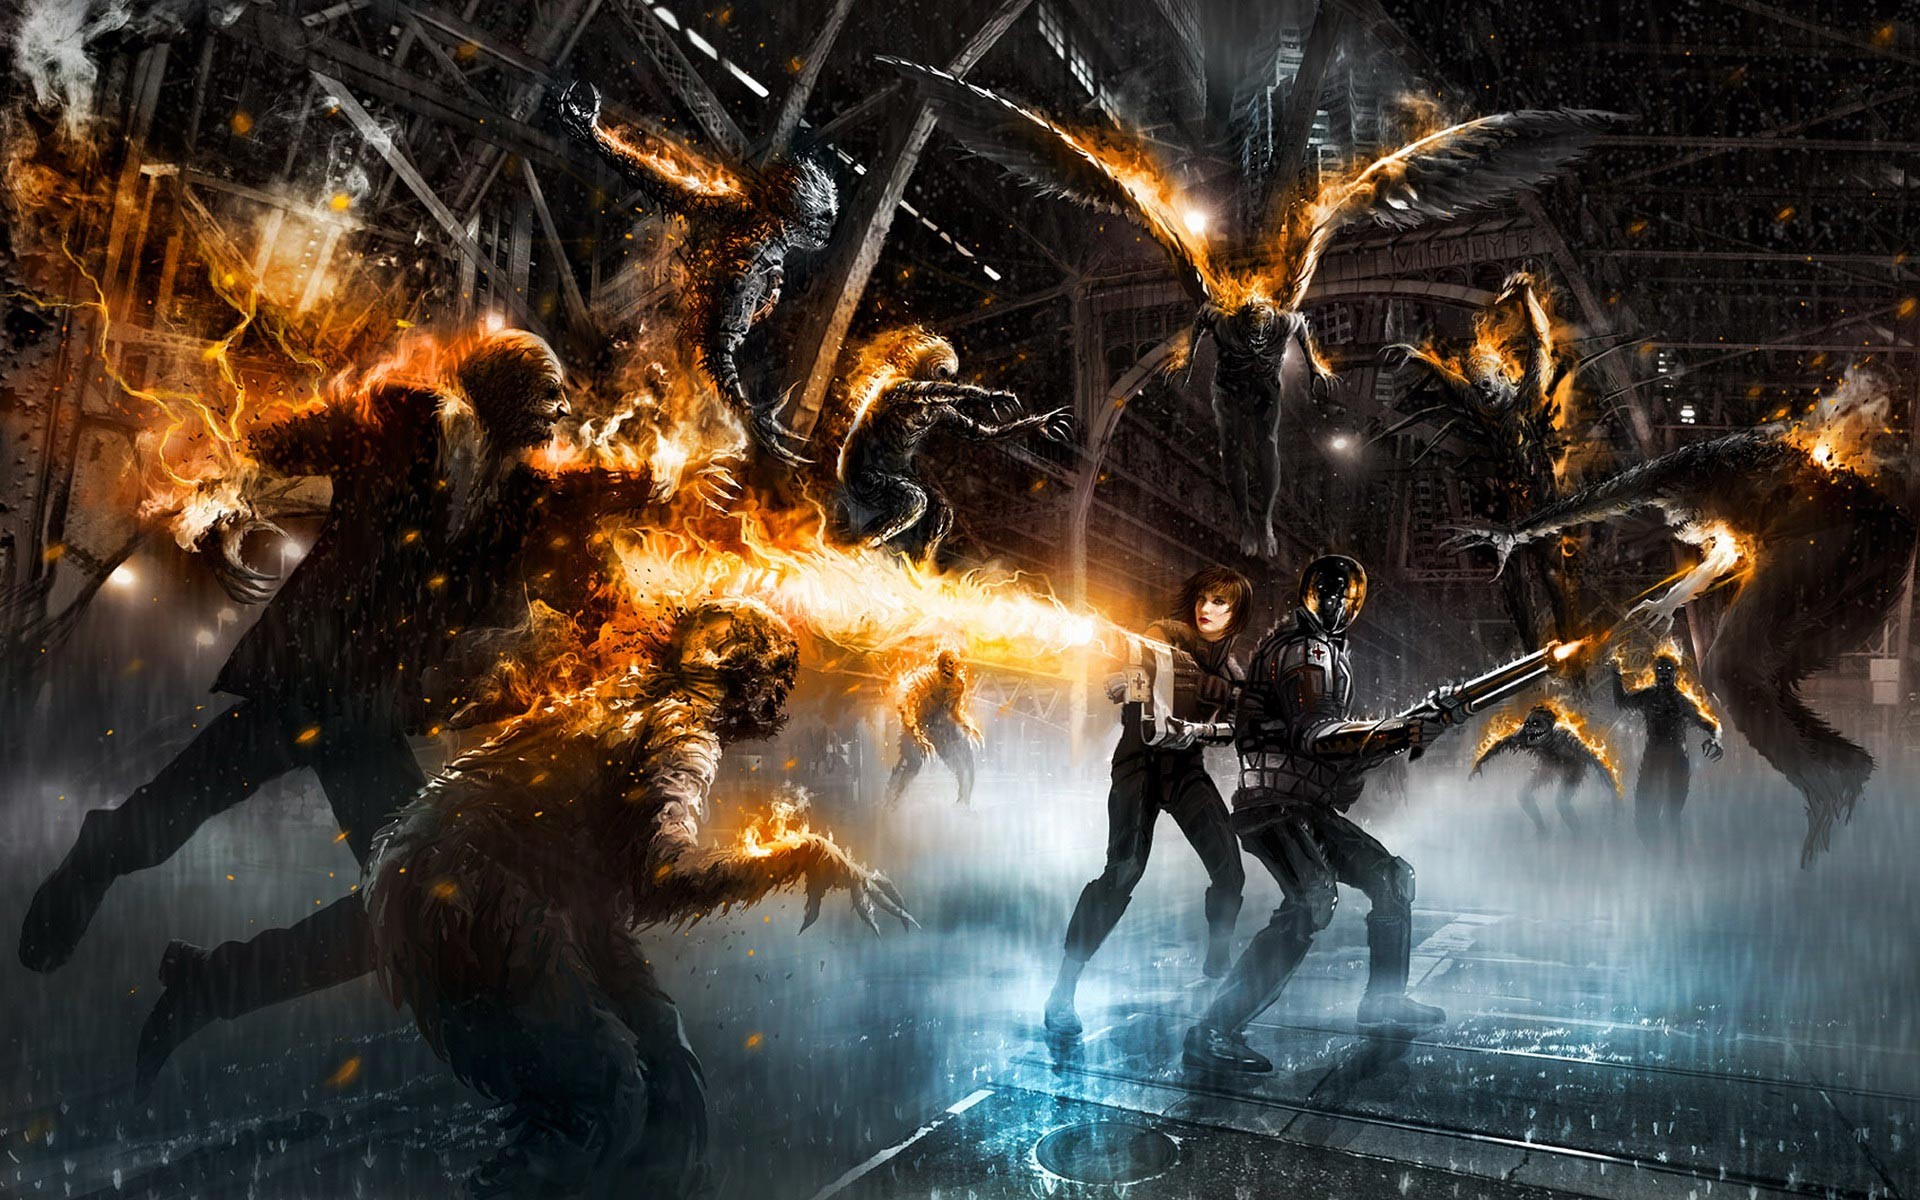 1920x1200 Fantasy zombie fight in rain wallpaper from Zombie wallpapers